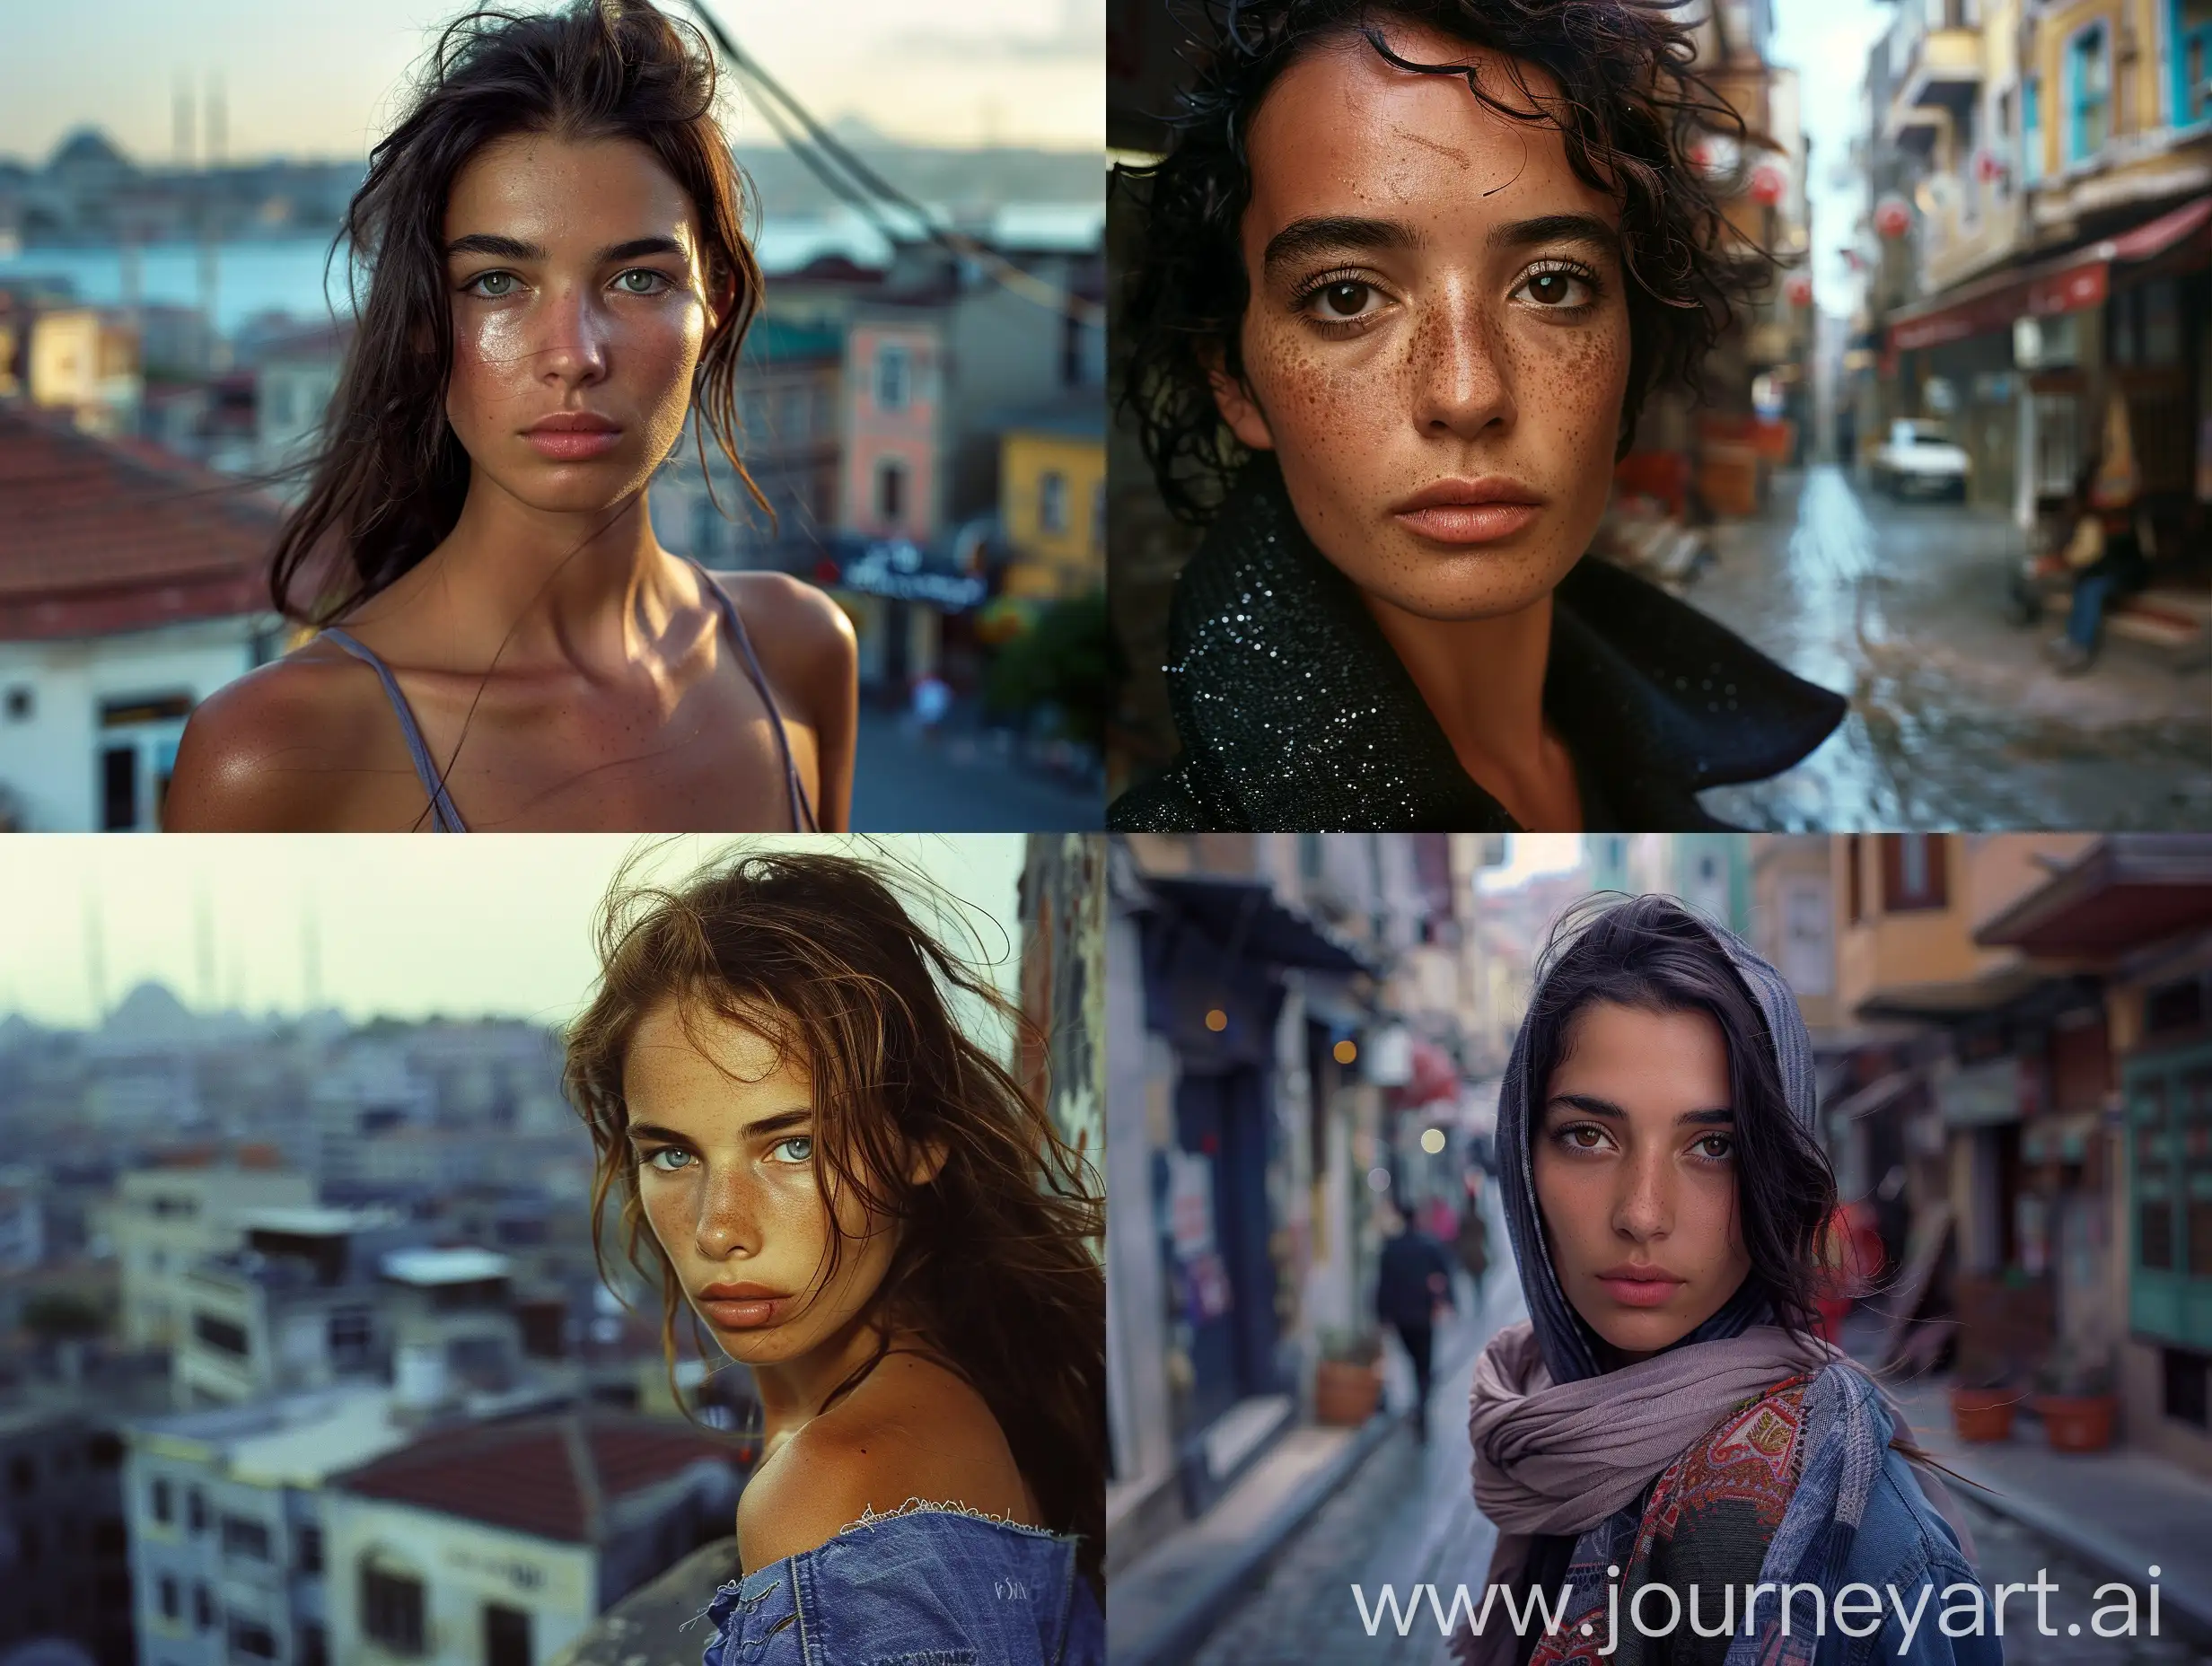 top model woman, photorealistic, Hasselblad color, Steve McCurry style lighting, Istanbul streets in the background, 2.8 aperture, 70-200 lens,